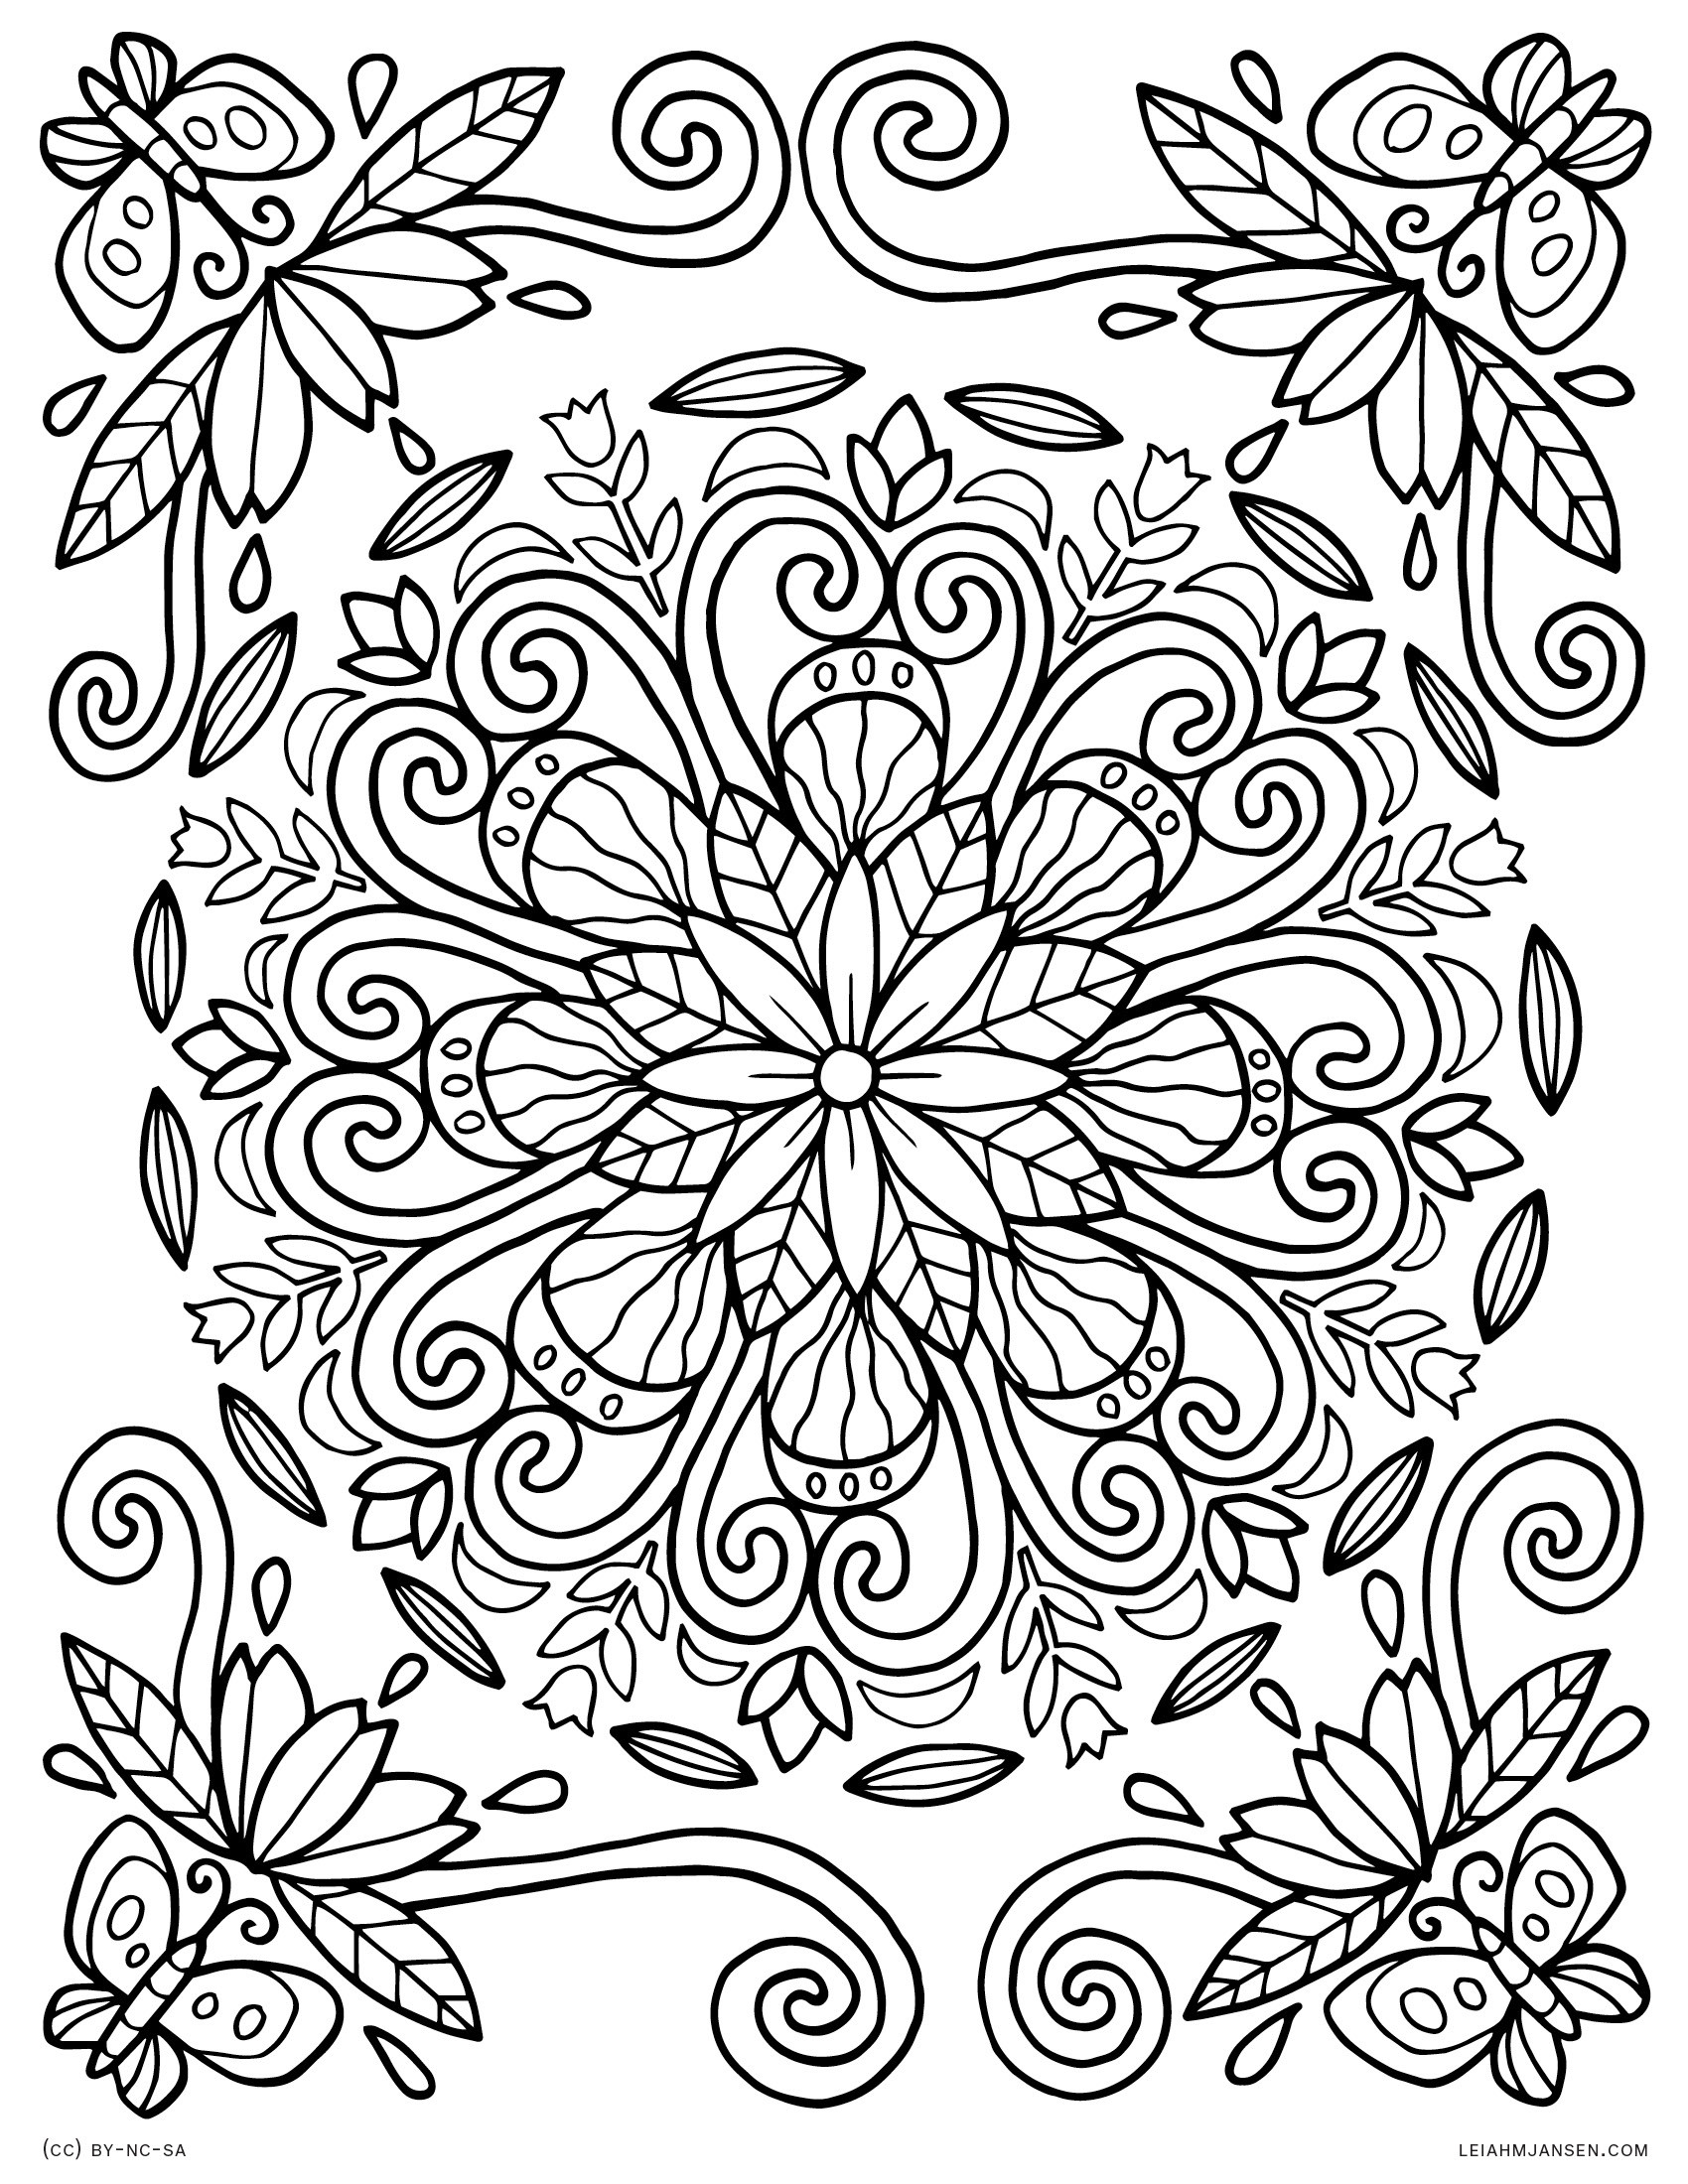 Free Spring Coloring Pages For Adults
 Mandala Coloring Pages Nature to Print